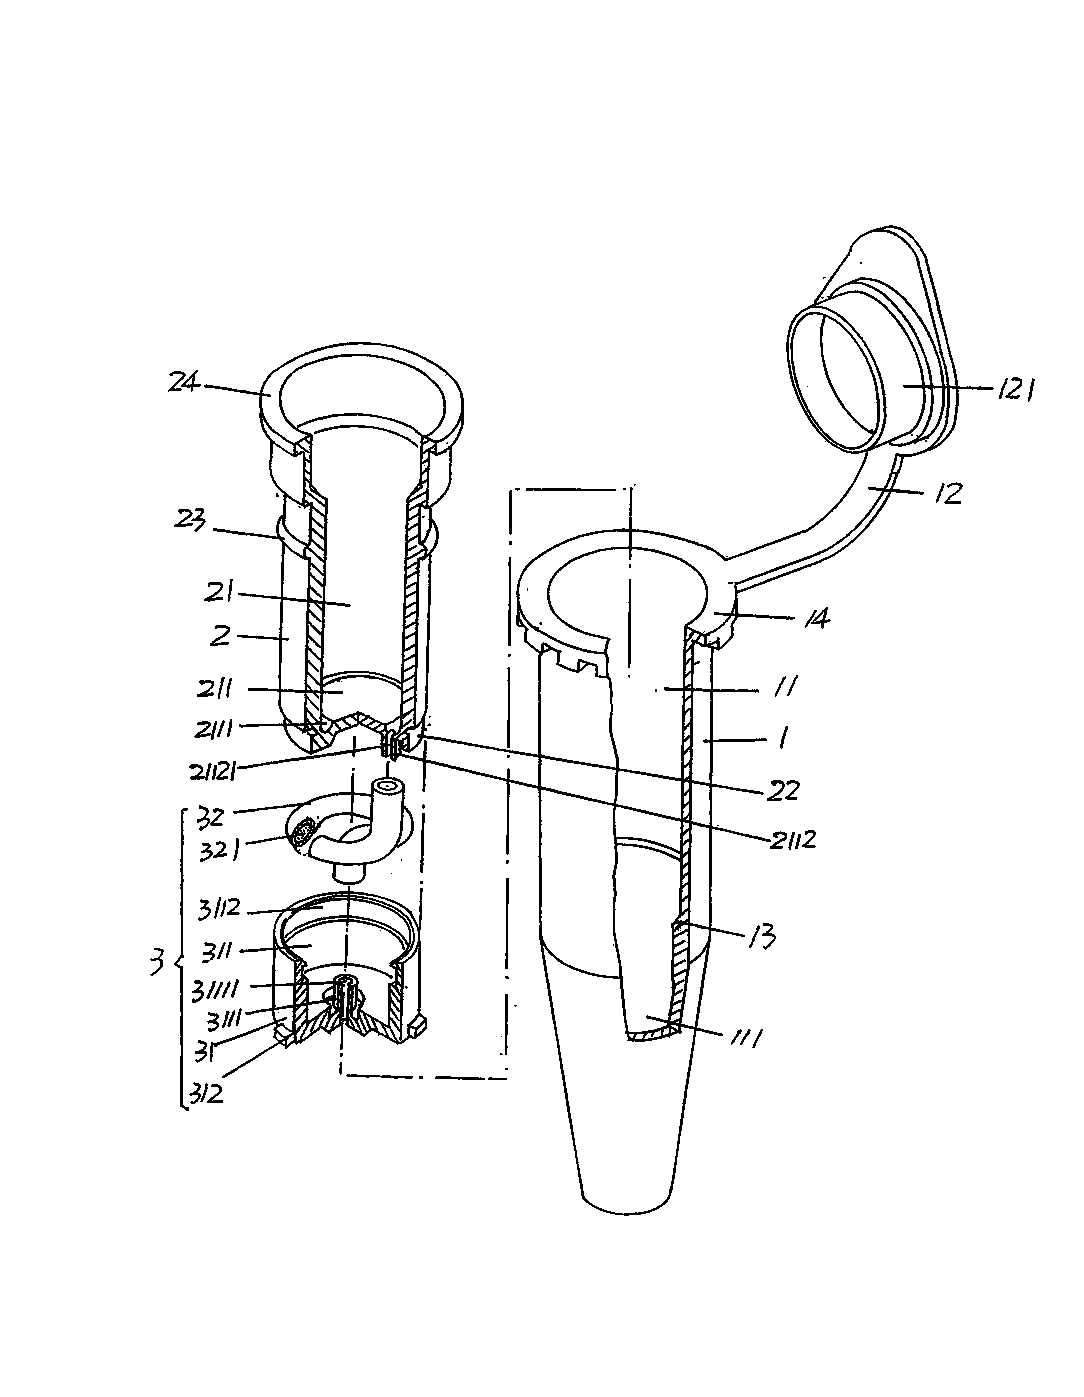 Centrifugal sleeve tube structure used for separating and extracting DNA